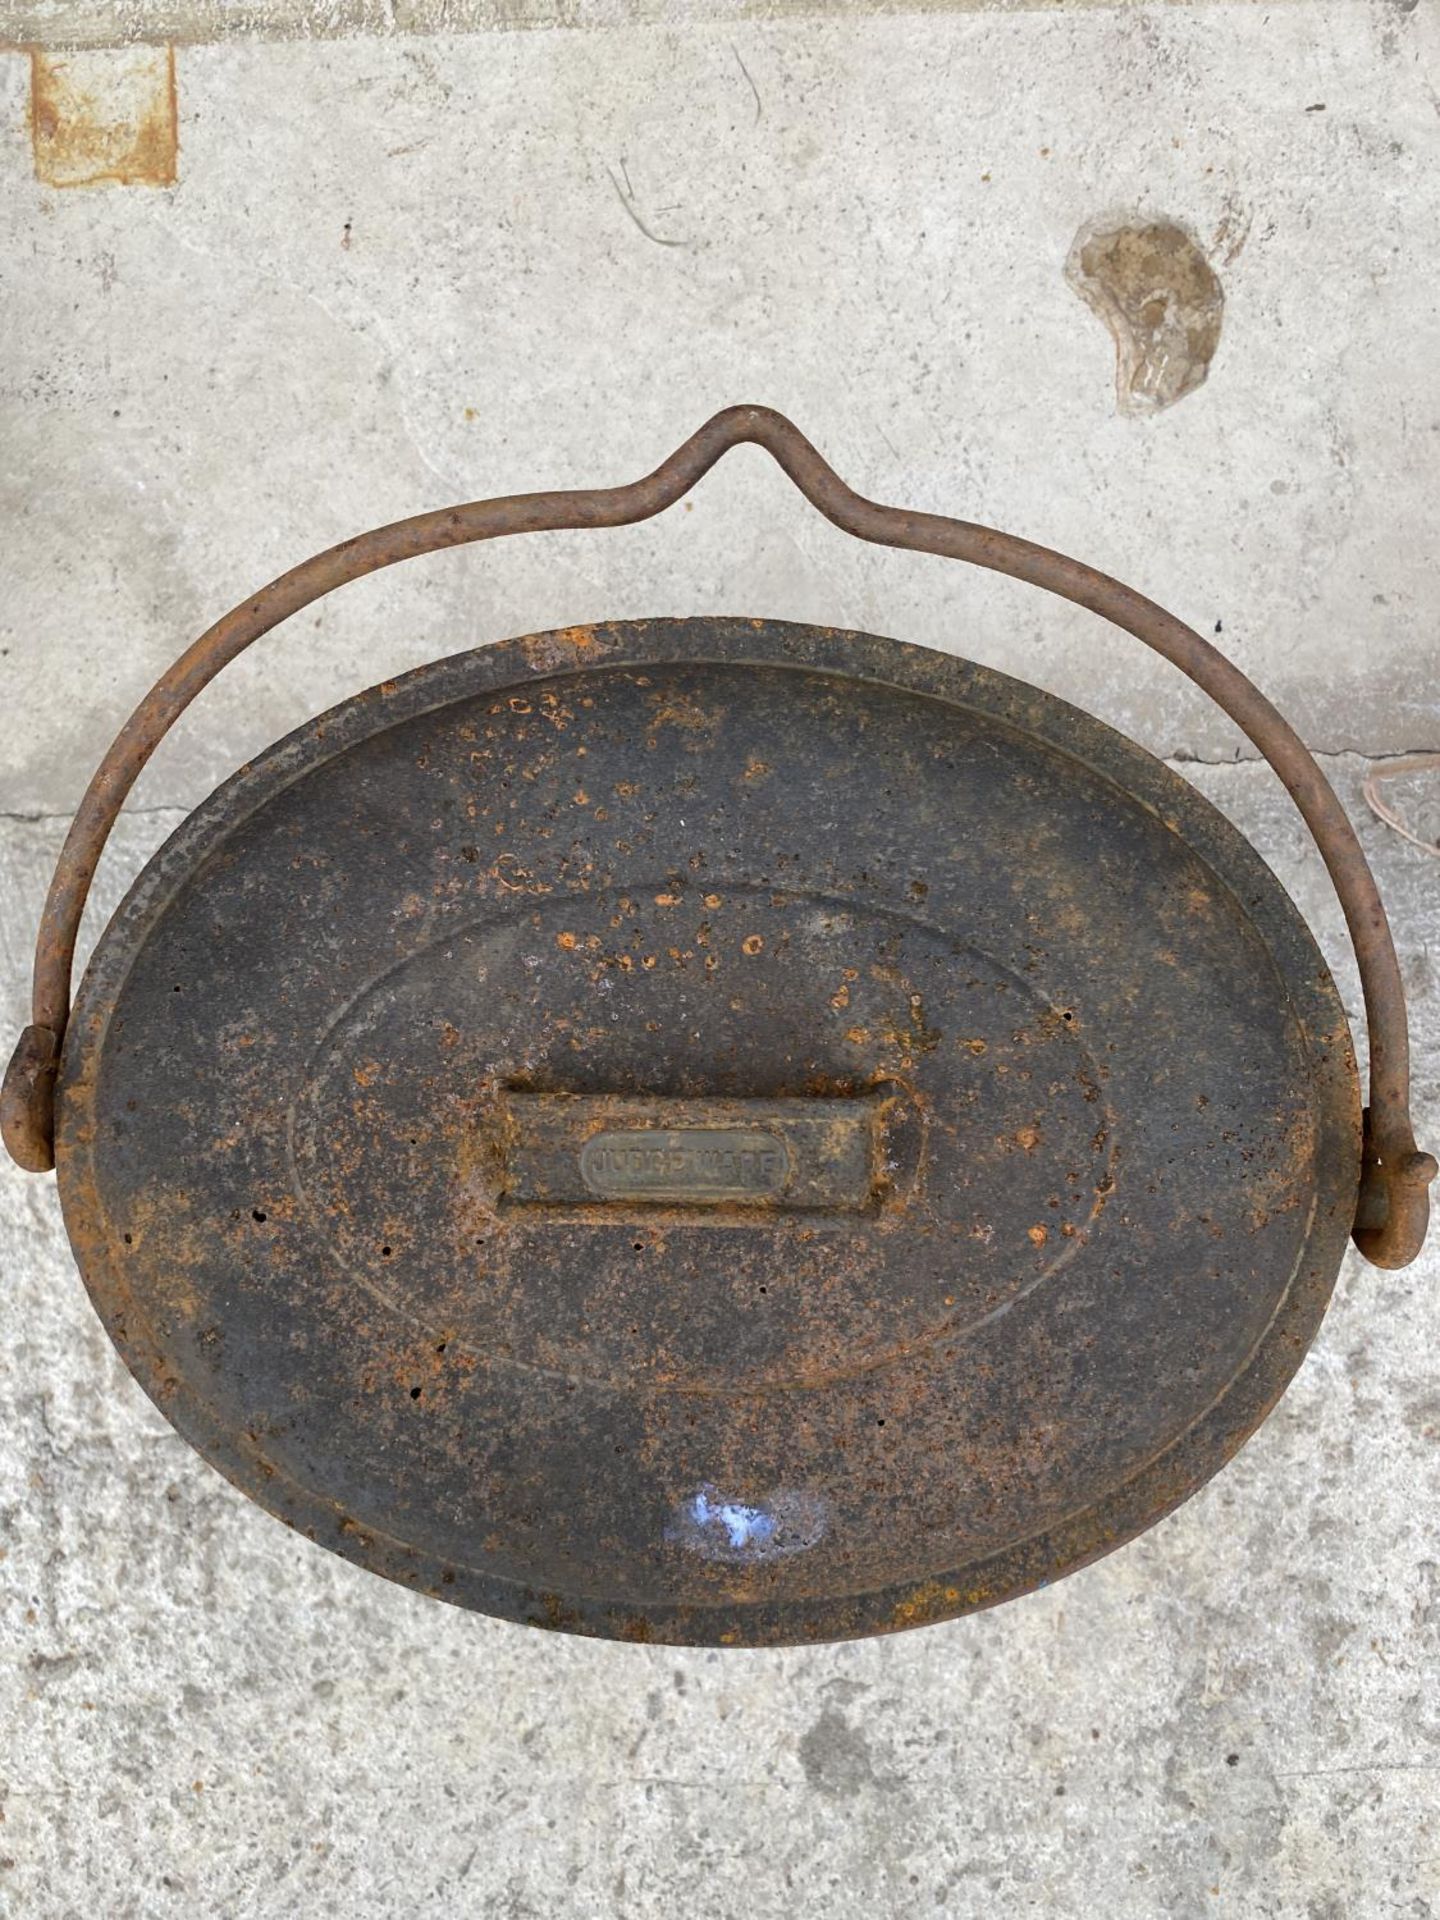 A VINTAGE CAST IRON ROMANY POT BELLY COOKING POT COMPLETE WITH LID - Image 3 of 4